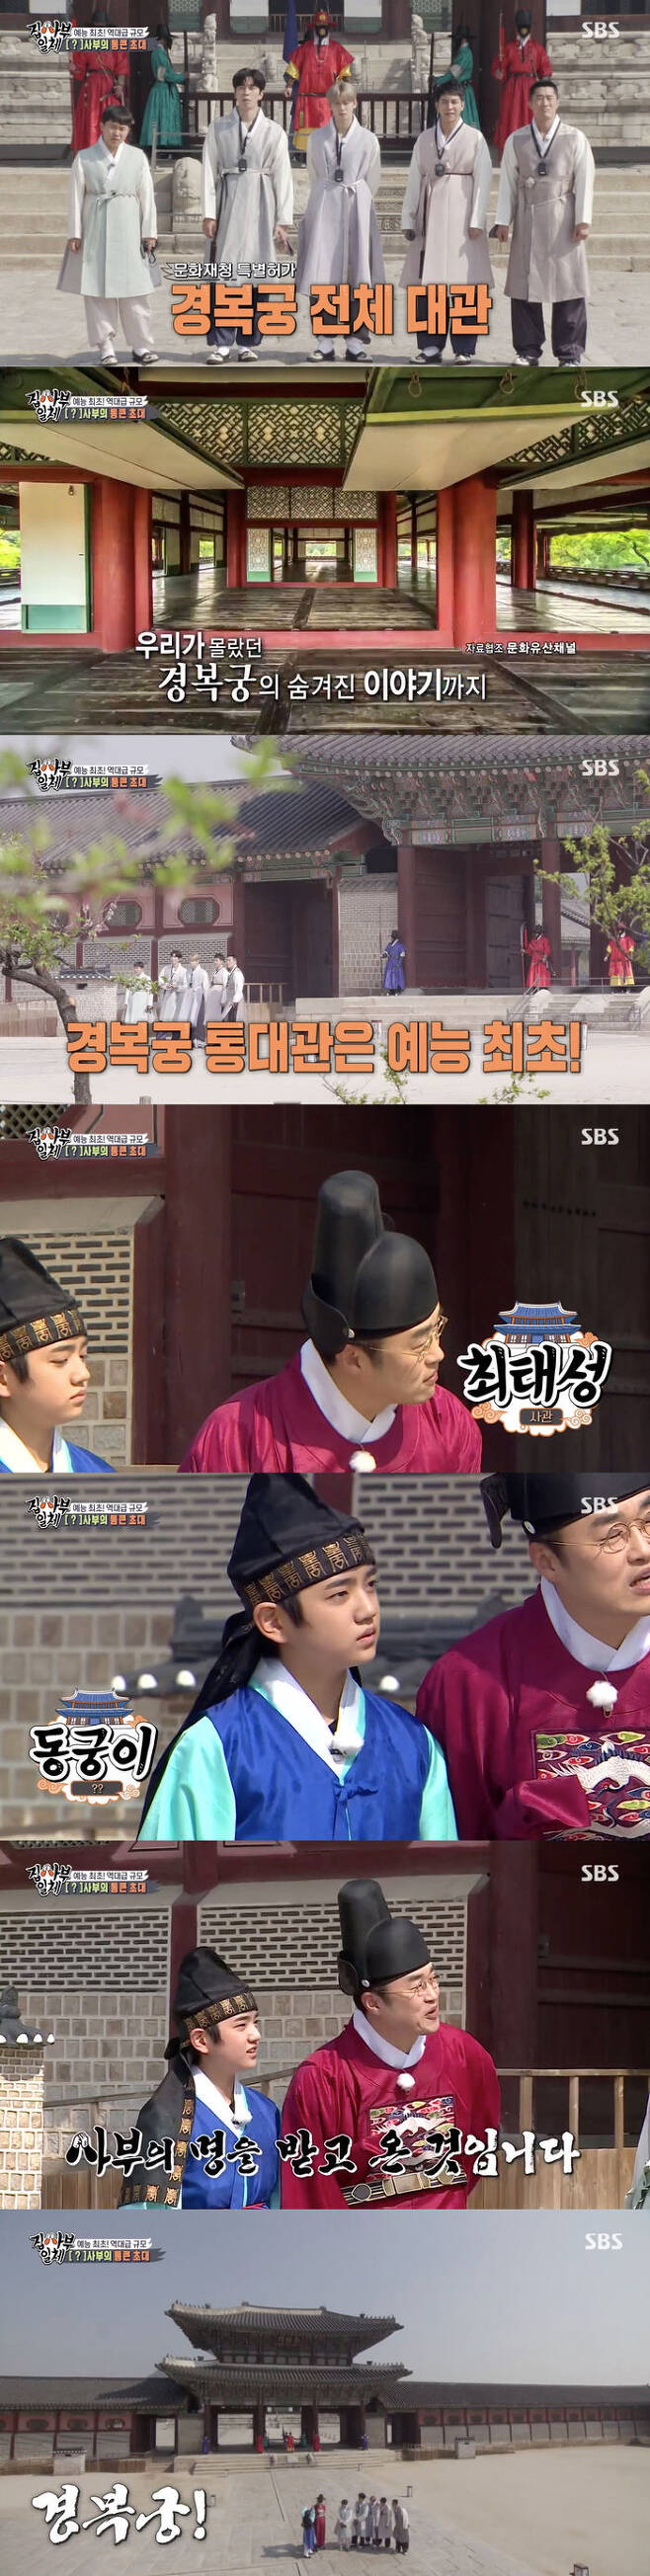 Todays special master has been unveiled.On SBS All The Butlers broadcast on the 2nd, the disciples were drawn to a special place to meet todays Master.On the day of the broadcast, the production team surprised everyone by saying that the Cultural Heritage Administration specifically licensed the entire Gyoungbokgung Gauleiter before introducing the Master.Especially, it was the first of the arts that gave Gauleiter to see every corner of Gyeongbokgung.And at this time, Choi Tae-sung and Goodbye My Princess appeared in front of the disciples and attracted attention.Goodbye My Princess will be a good guide to know Gyongbokgung best here, the officer explained of Goodbye My Princess.They also introduced the Master of the Day, saying, We heard that you are coming to the Joseon Dynasty because you are time slipping.The master introduced by Goodbye My Princess is gyeongbokgung.The disciples, along with the Gyeongbokgung Master, were excited to prepare for the history we did not know.Masters, not people, are the first.Lee Seung-gi said, Gyeongbokgung is so excited when he says Master, and Kim Dong-Hyun said, It is like the first and best master.